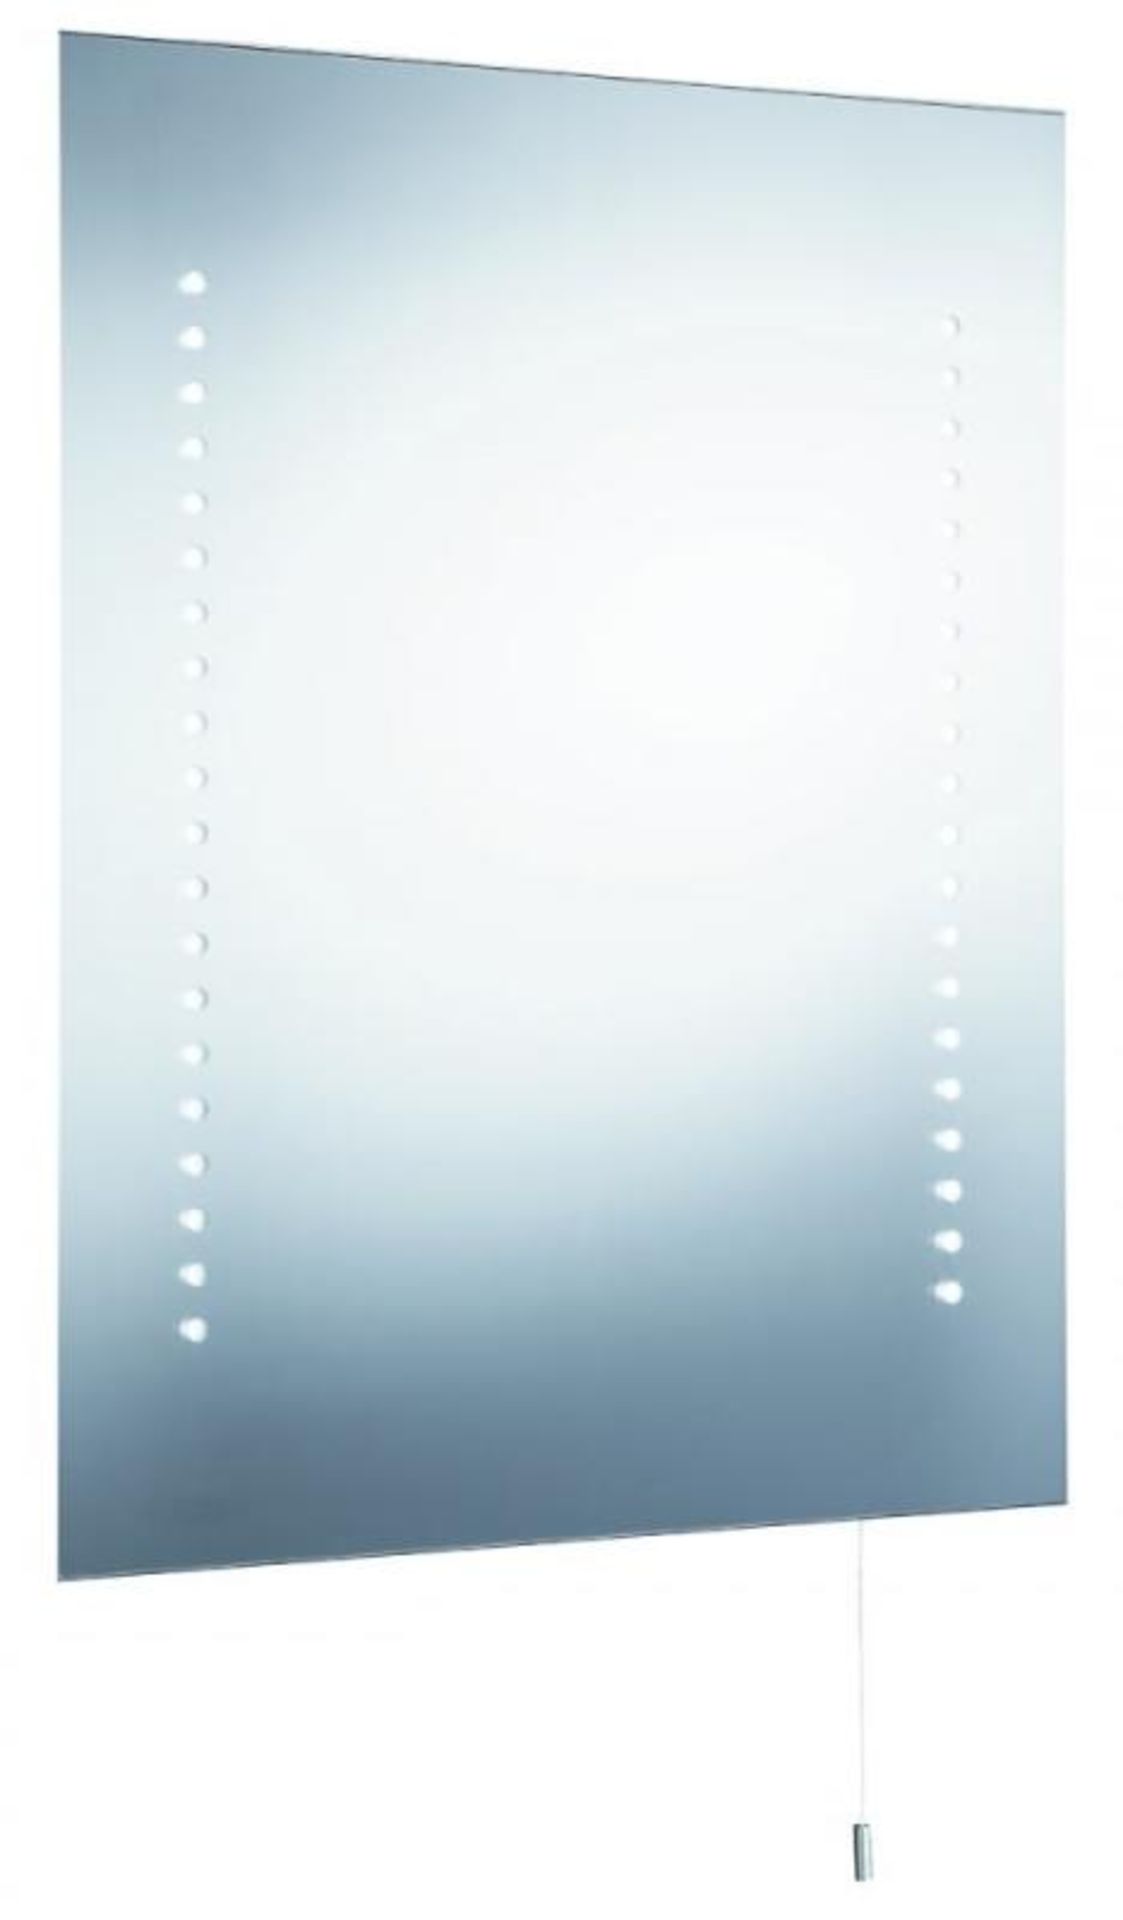 1 x Bathroom Light Led Mirror Battery Operated - New Boxed Stock - CL323 - Prodouct Code 9305 - Ref - Image 2 of 2